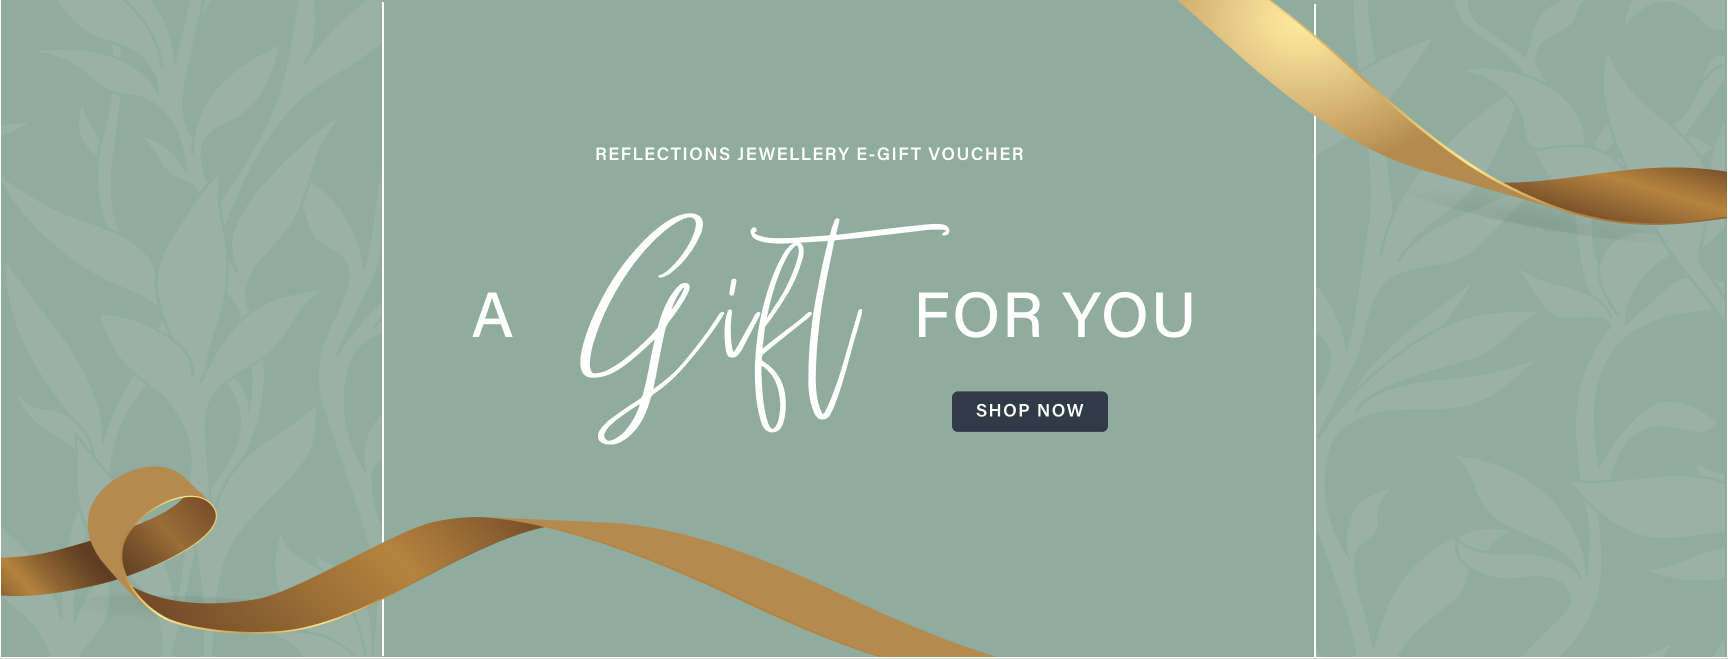 Reflections Jewellery E-gift Vouchers A gift for you